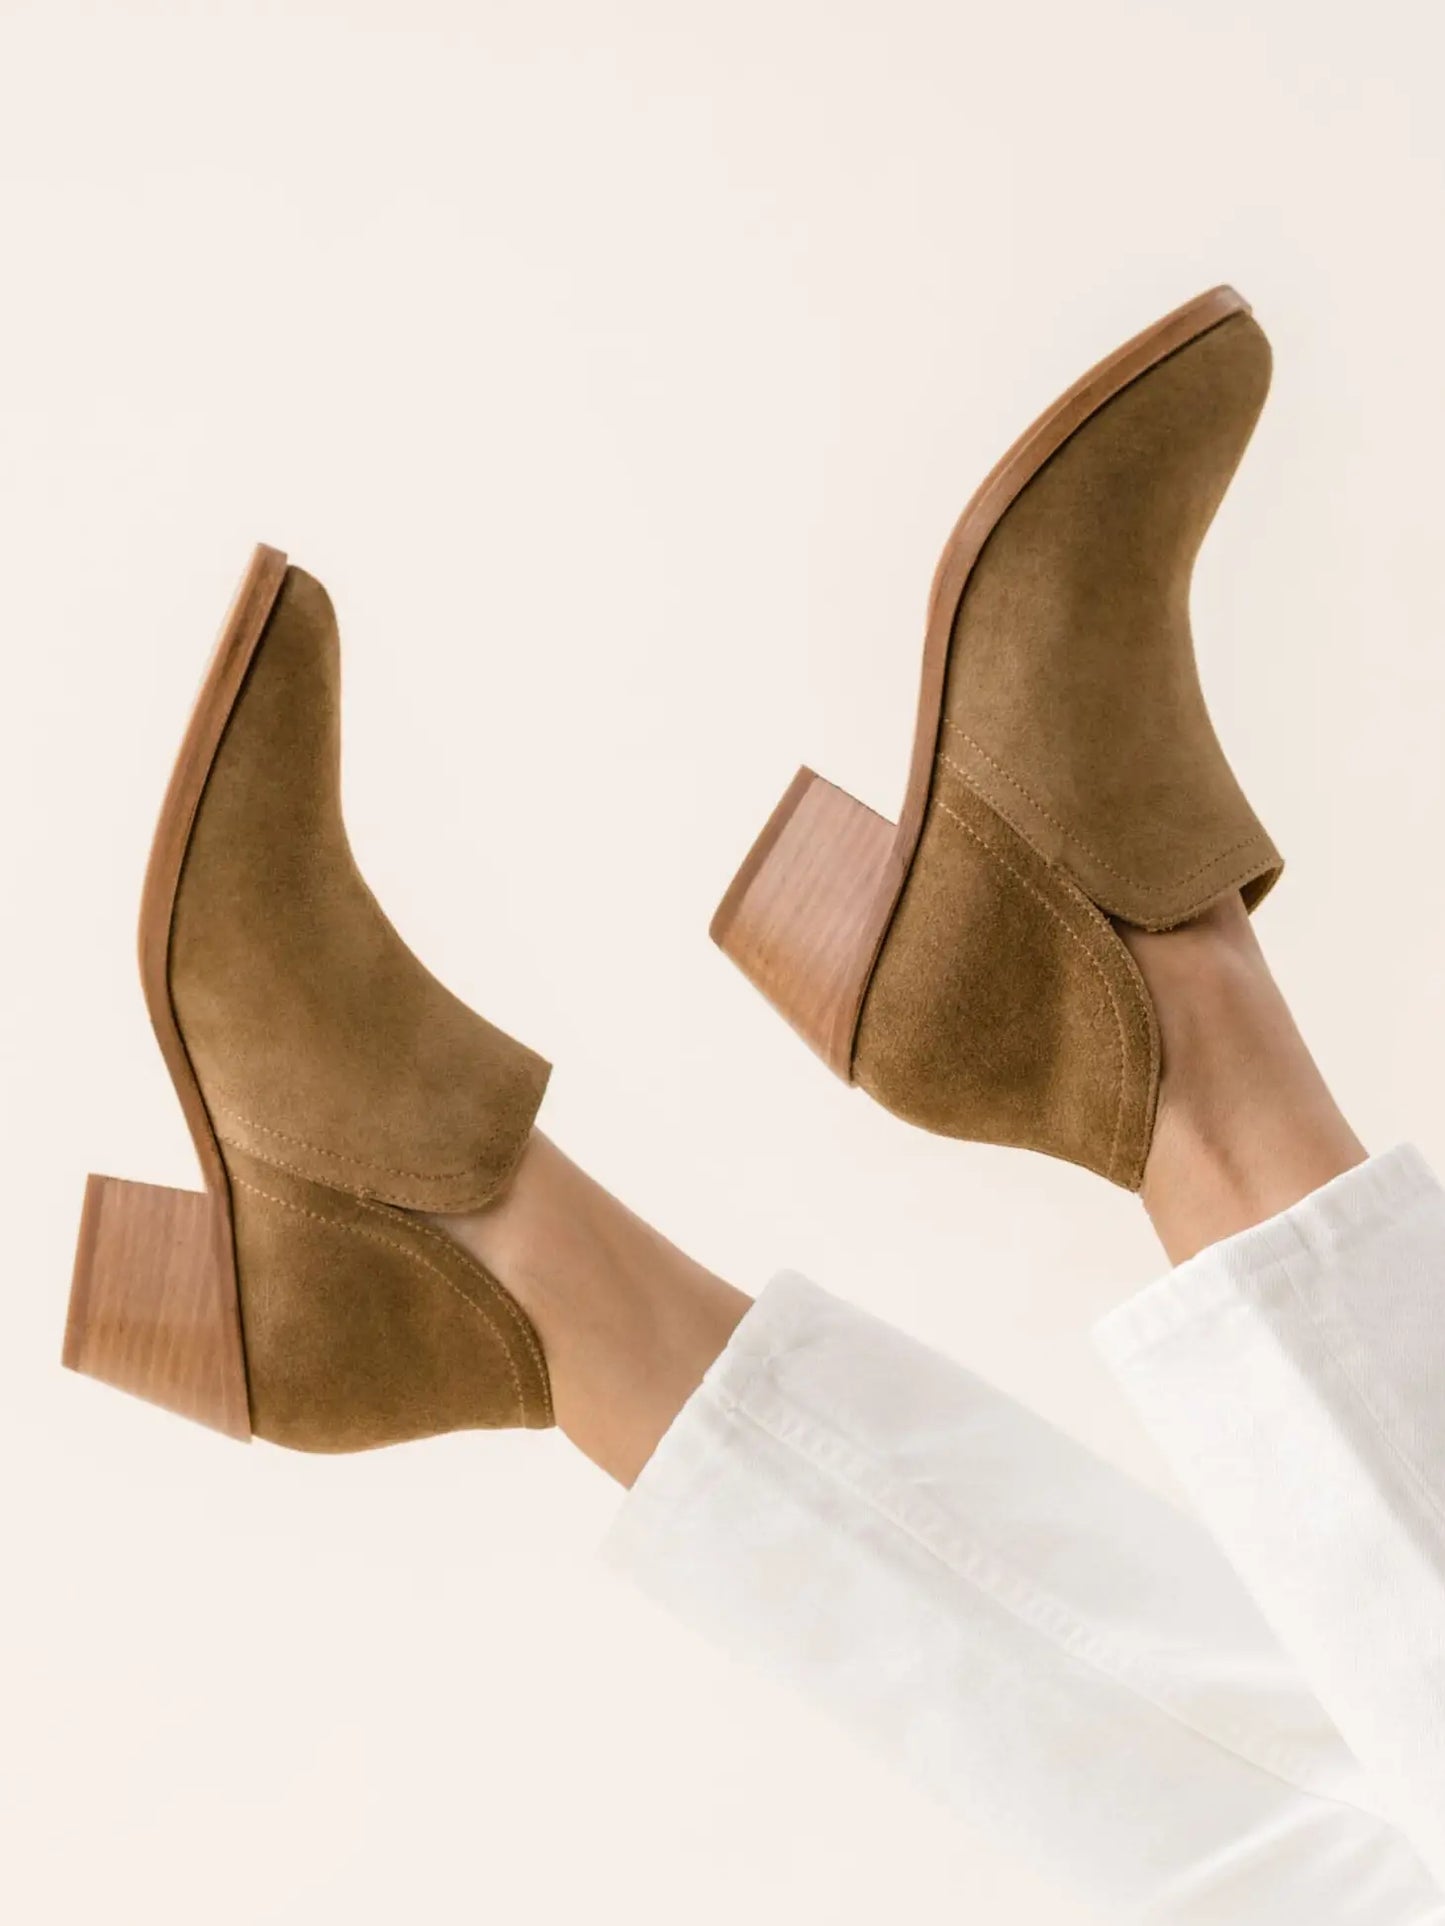 Mia Everyday Ankle Bootie (Taupe Suede)